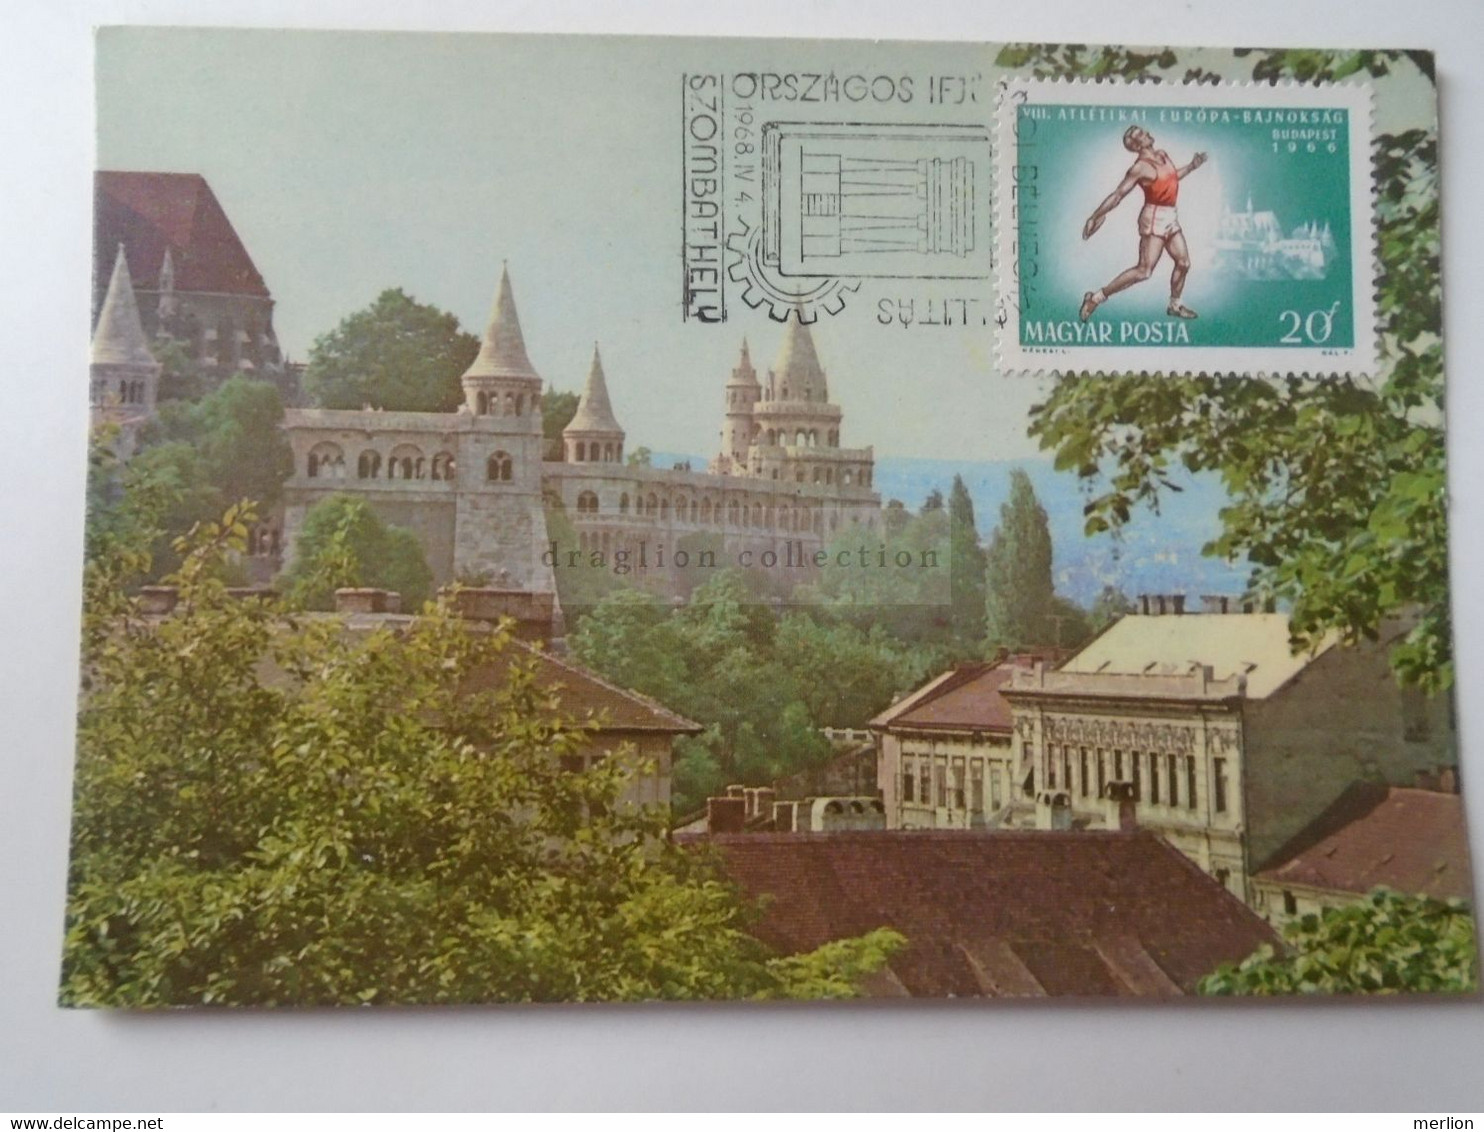 D185843    Hungary Szombathely Stamp Exhibition 1968 Handstamp On  Budapest Postcard   1961 - Postmark Collection